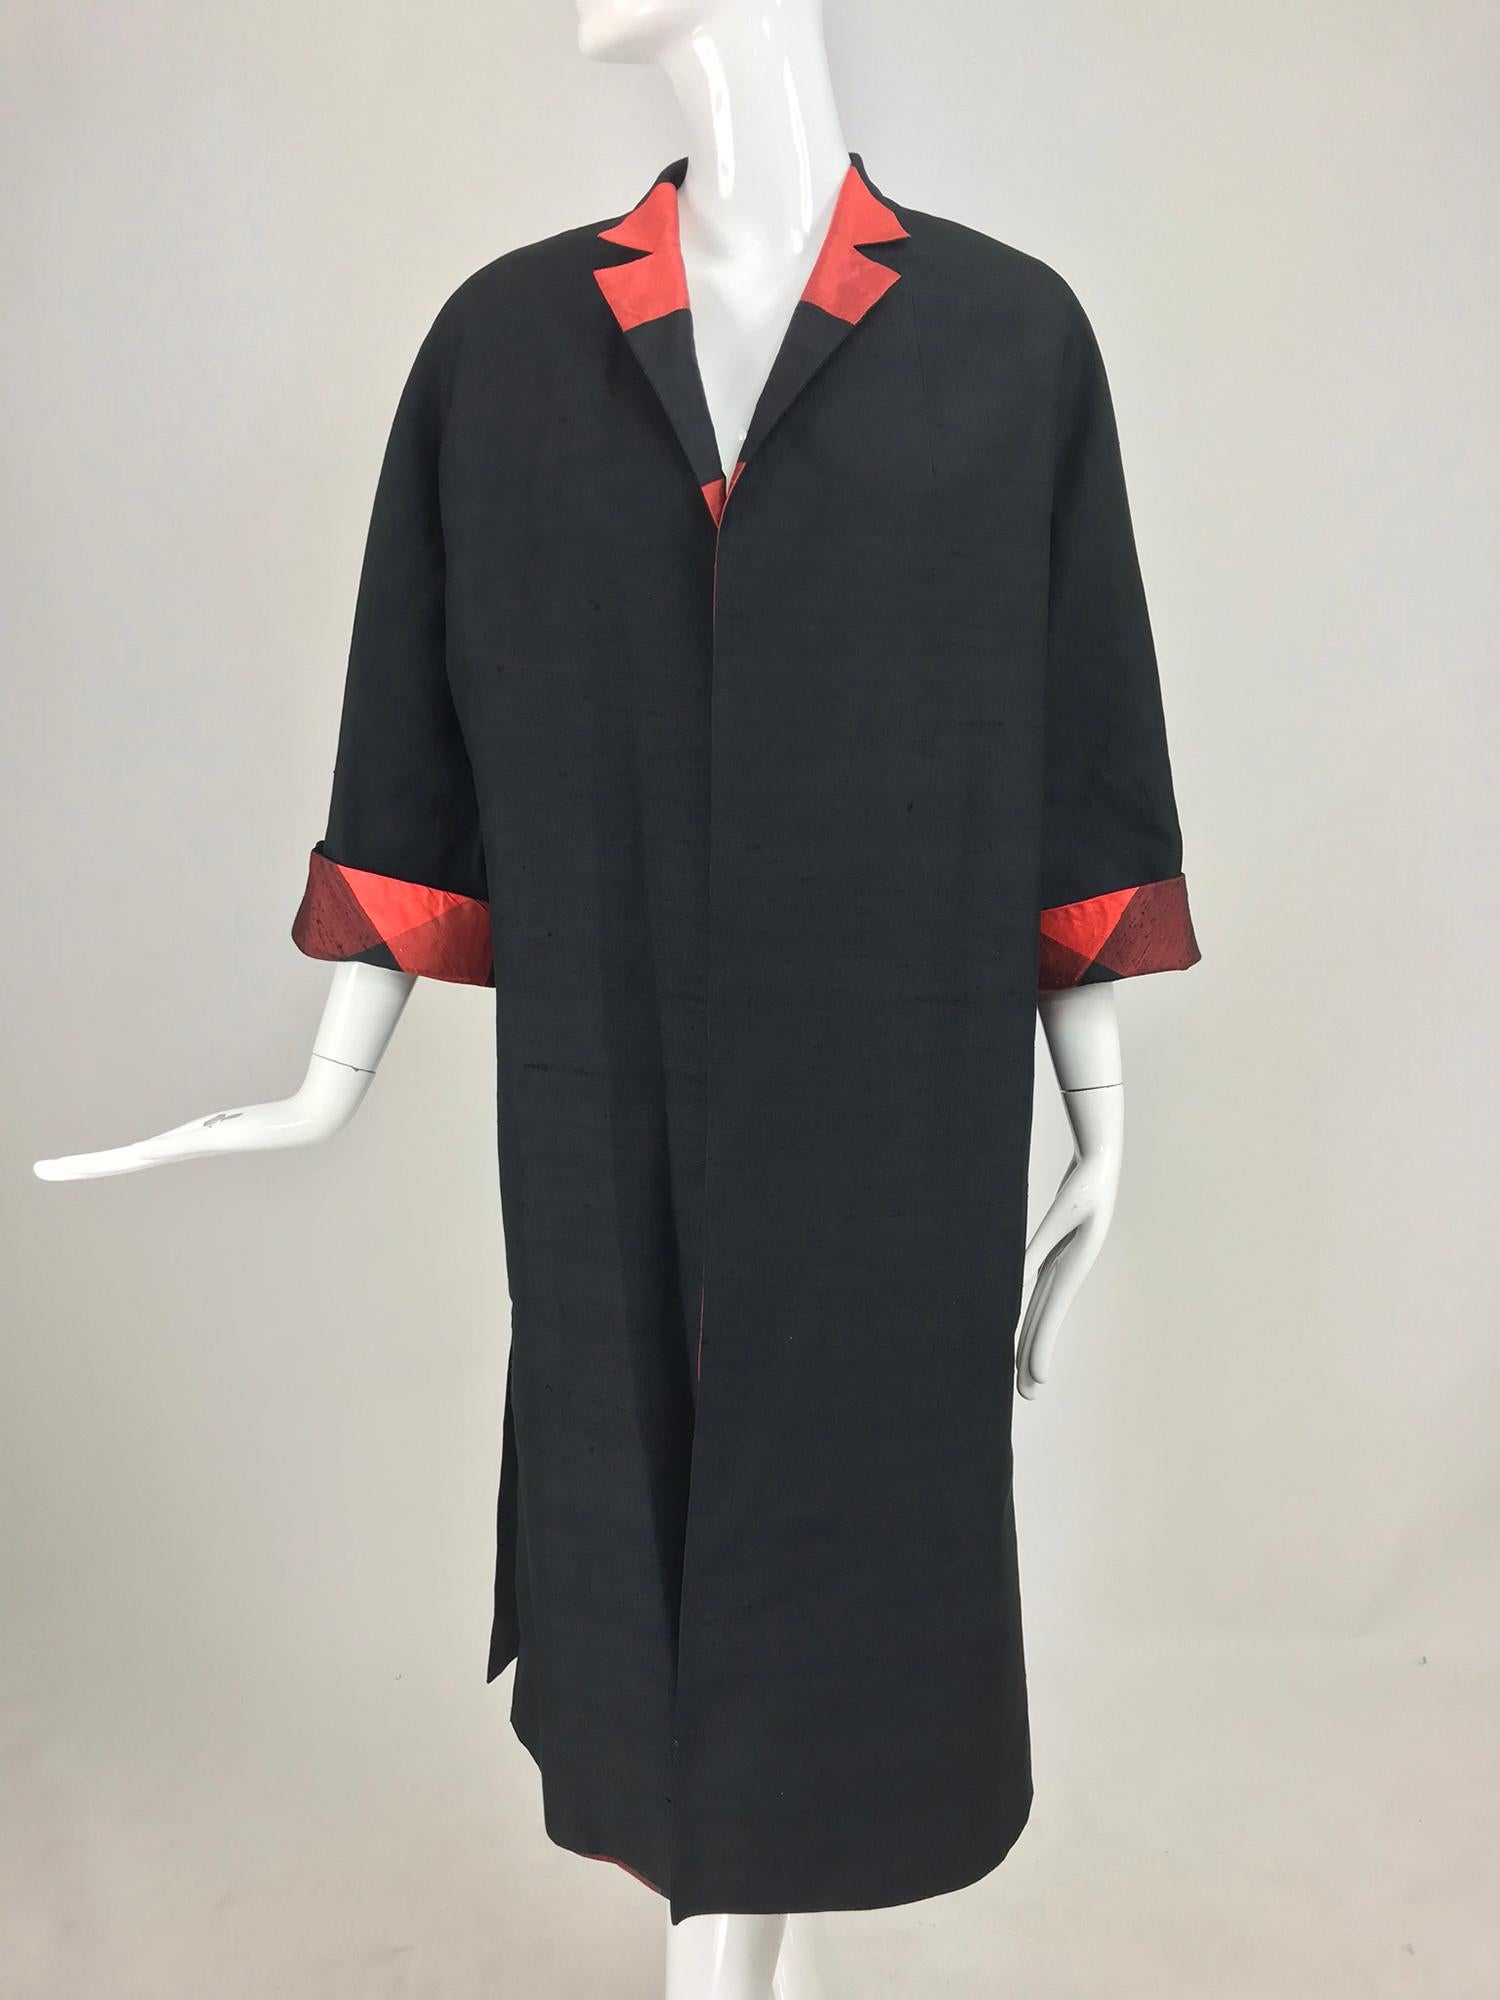 1950s Silk Shantung Reversible Coat Black and Orange Buffalo Plaid. A chic coat that can be worn two ways, the first, classic black silk shantung, the second large scale orange and black buffalo plaid. The coat is open at the front with 3/4 length